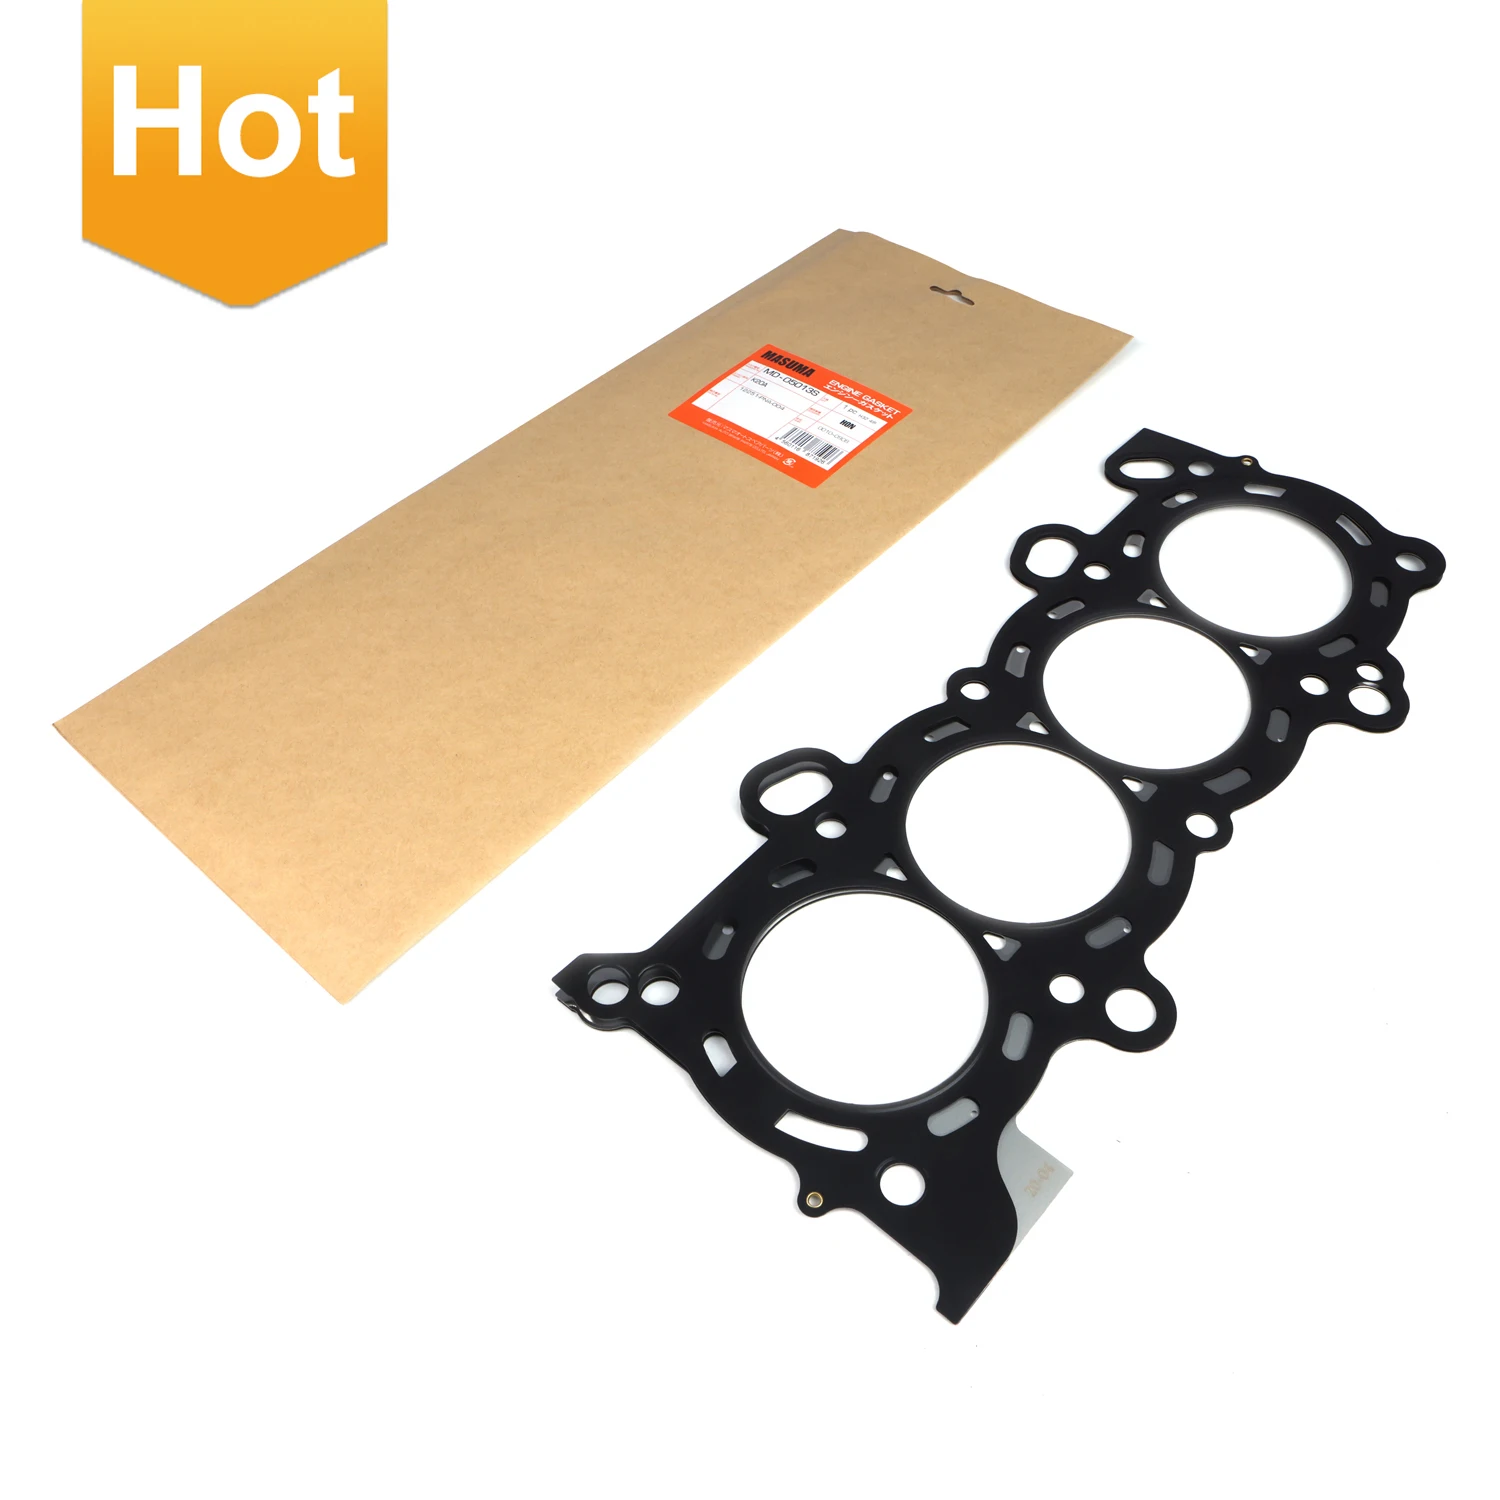 Wholesale MD-05013S MASUMA European Hot Deals value cover gasket Auto  Replacement Cylinder Head Gasket for 2000-2009 Japanese cars From 